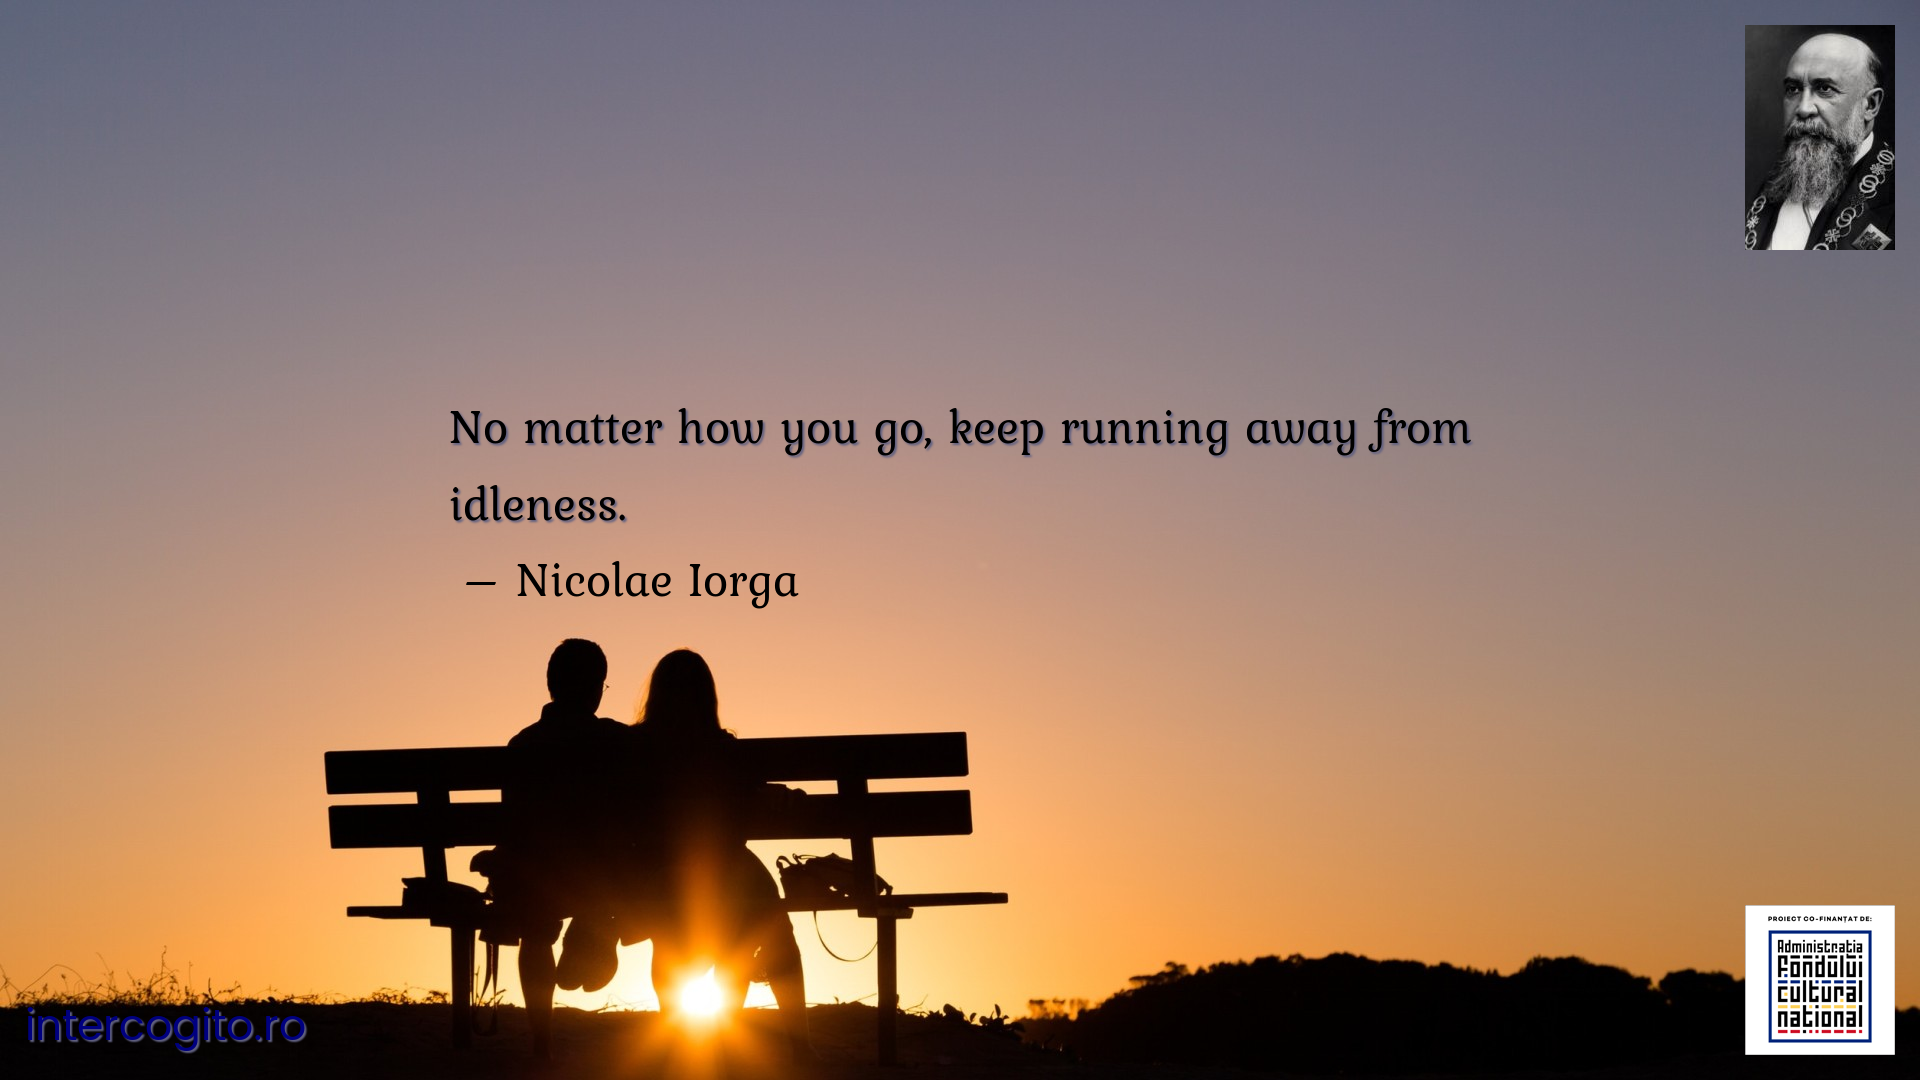 No matter how you go, keep running away from idleness.